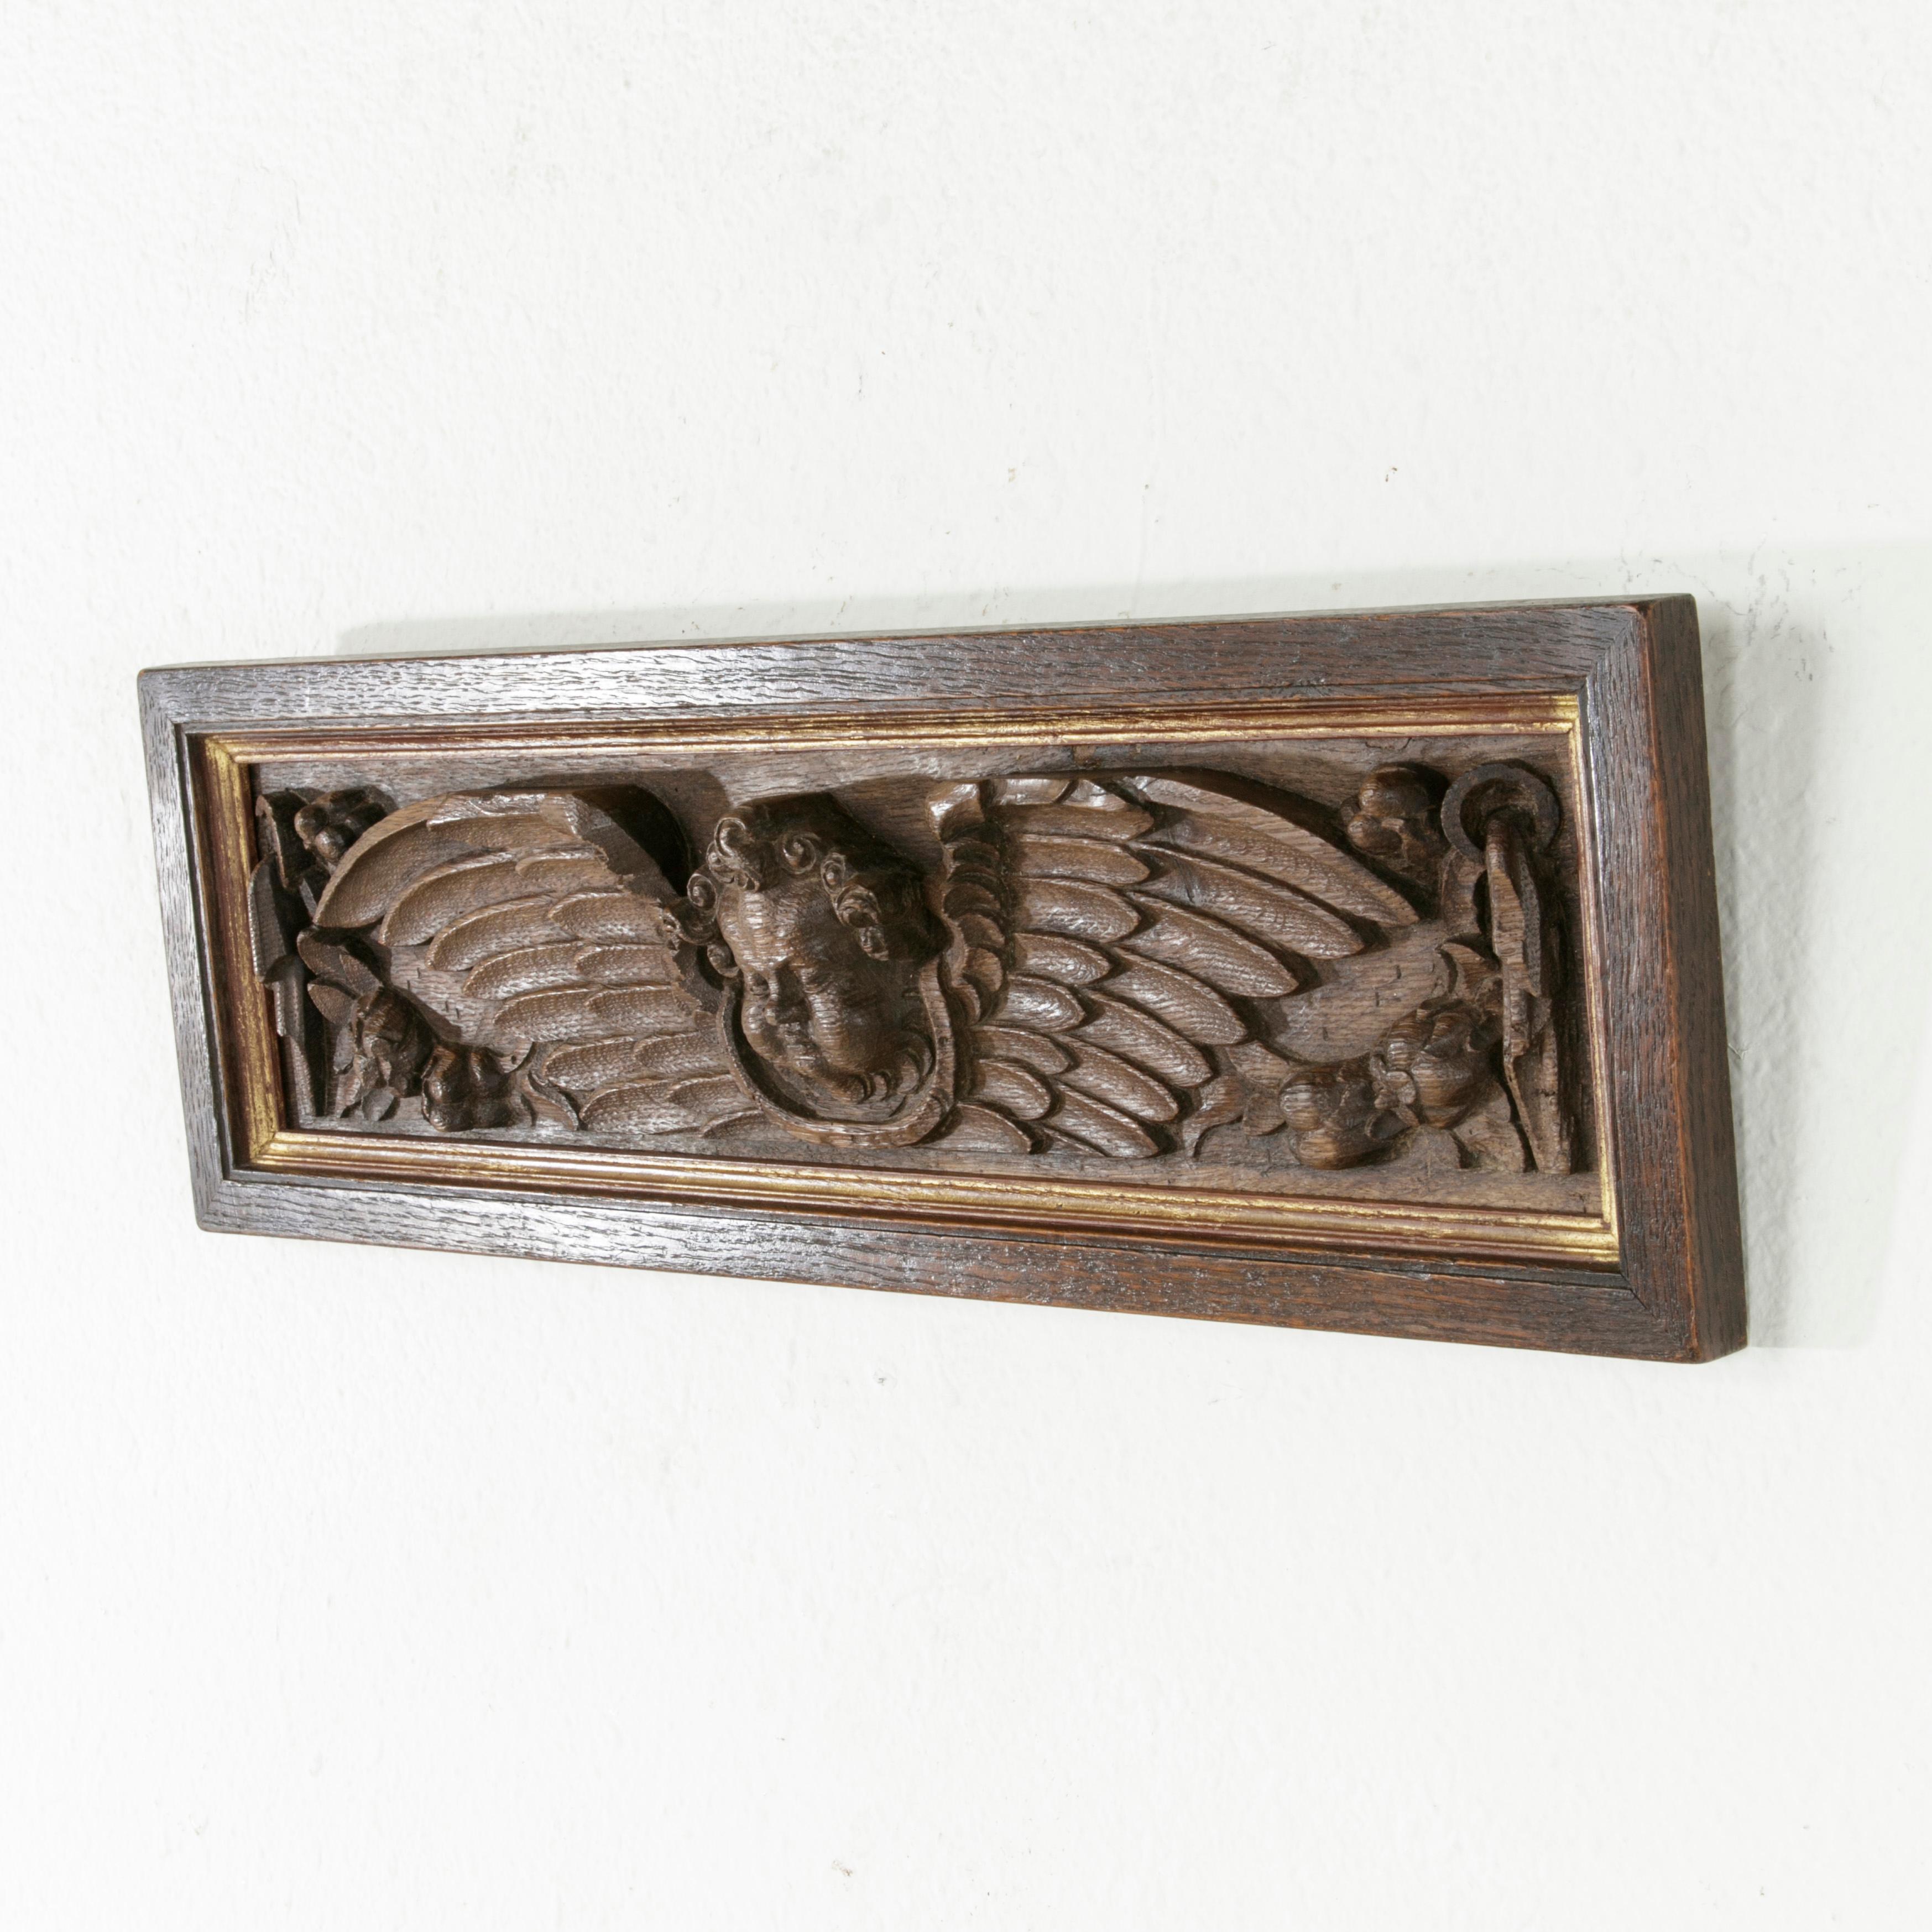 This French deep relief hand carved oak panel from the mid-18th century features an angel's face flanked by wings. Additional carvings of garlands of flowers draped from rings detail the piece. The Louis XV period panel is surrounded by an oak frame